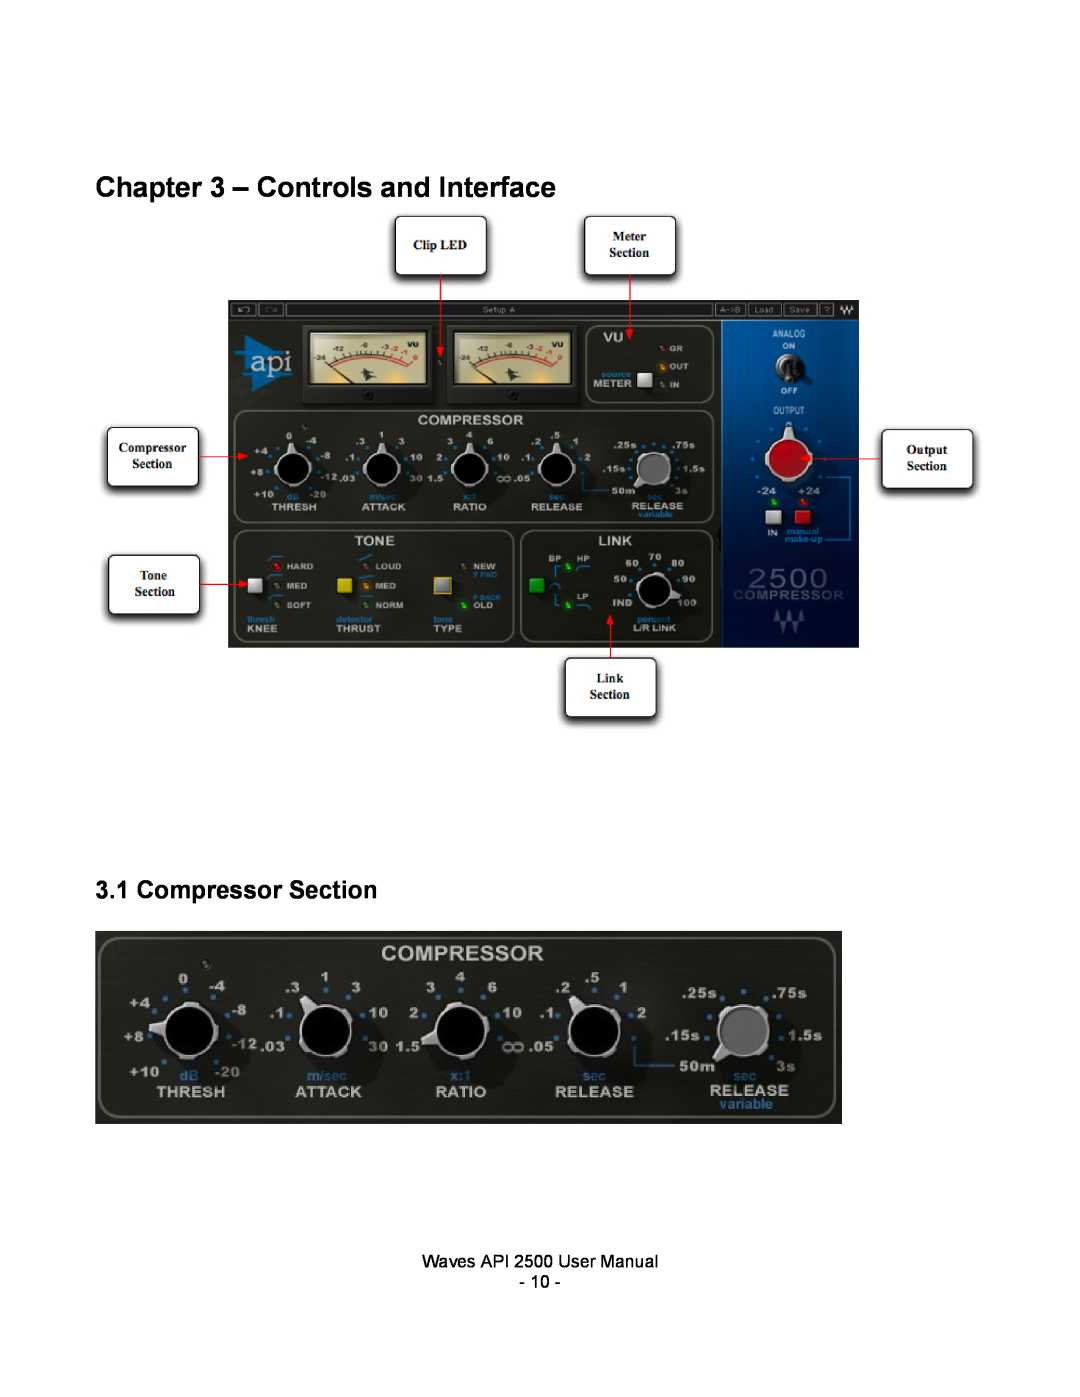 Waves 2500 user manual Controls and Interface, Compressor Section 